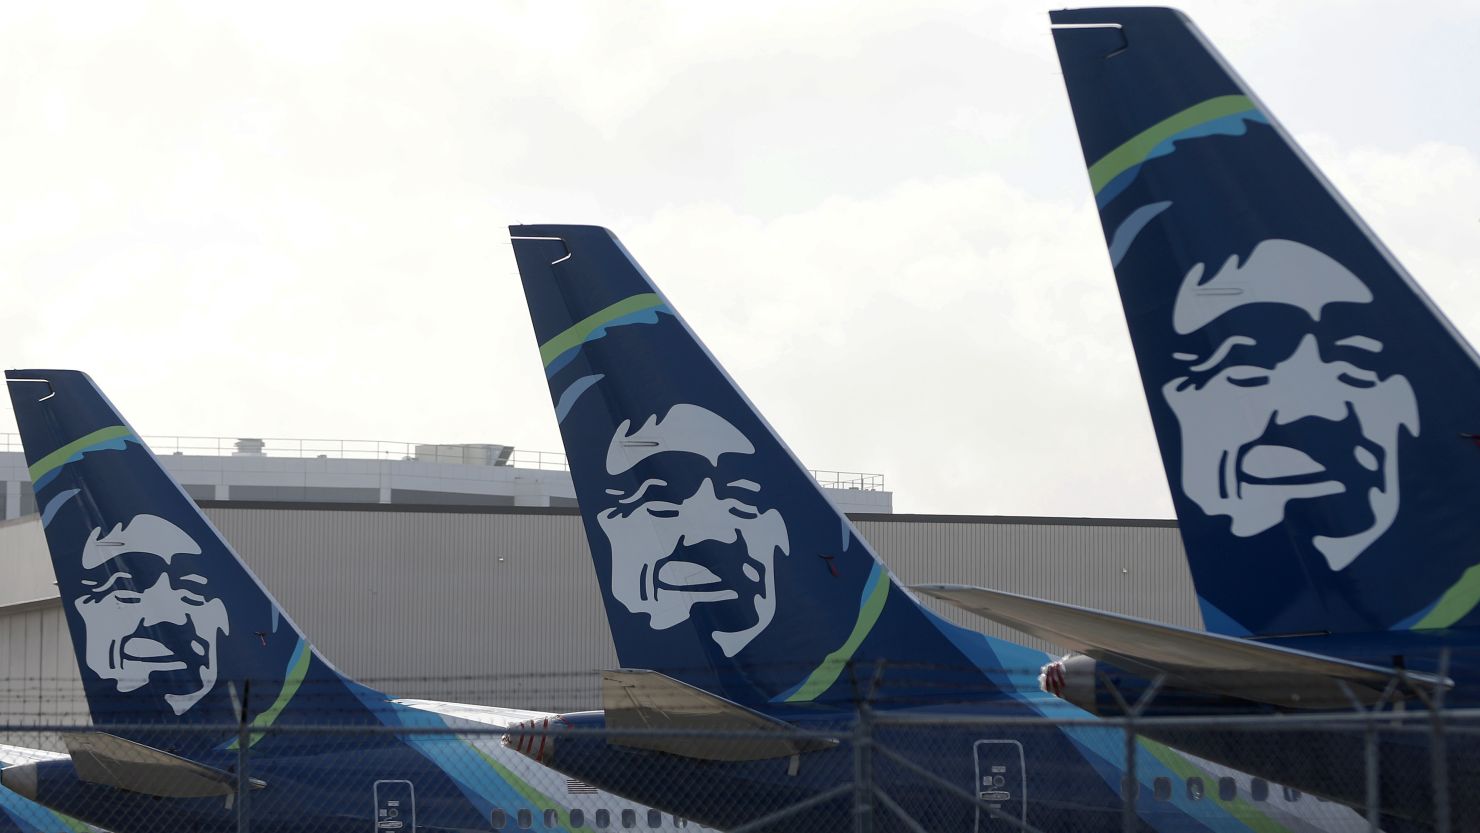 Alaska Airlines flights had been grounded earlier due to an issue during a system upgrade.